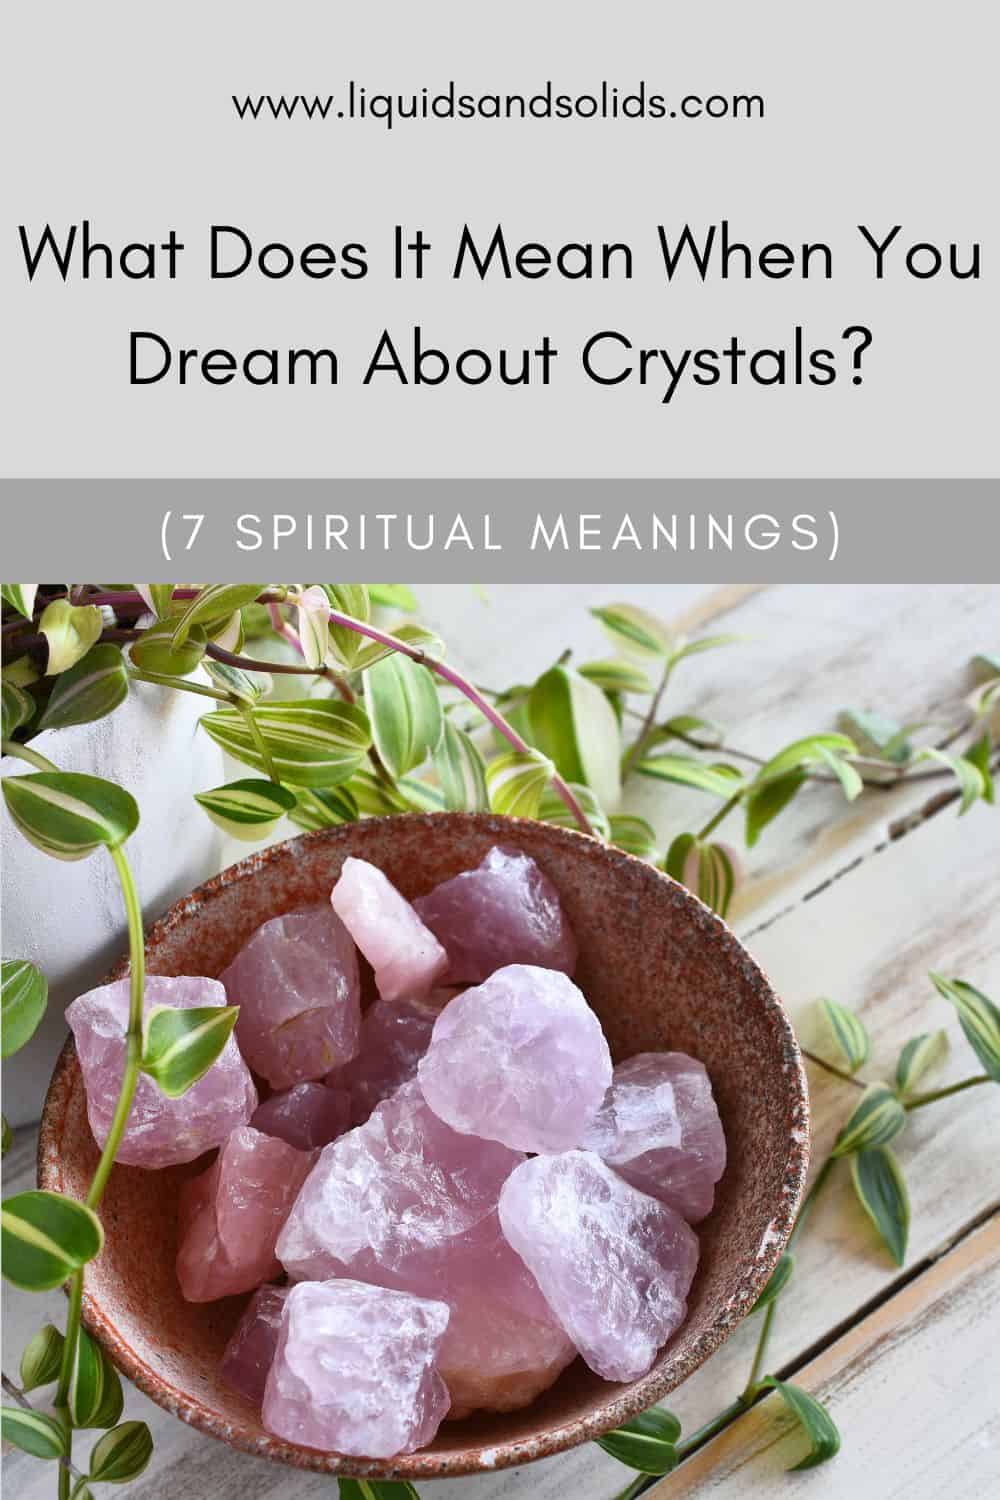 What Does It Mean When You Dream About Crystals? (7 Spiritual Meanings)